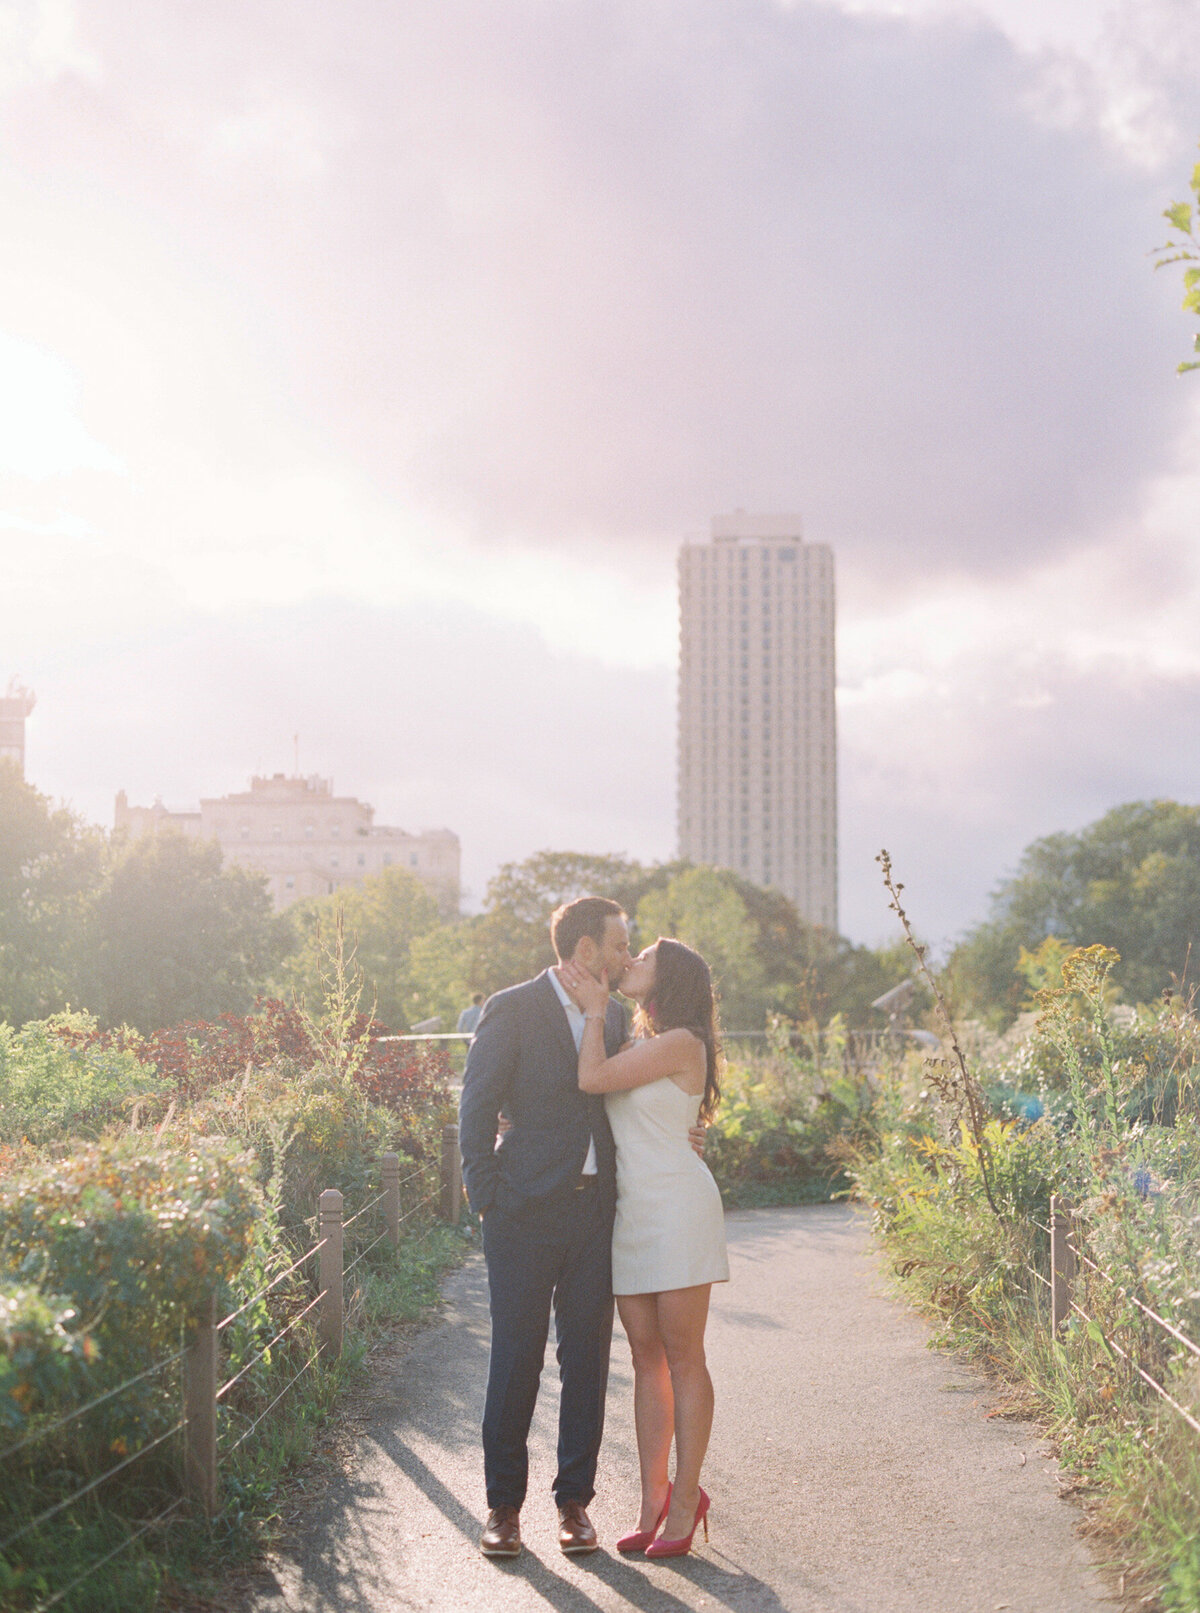 Lincoln Park Chicago Fall Engagement Session Highlights | Amarachi Ikeji Photography 29